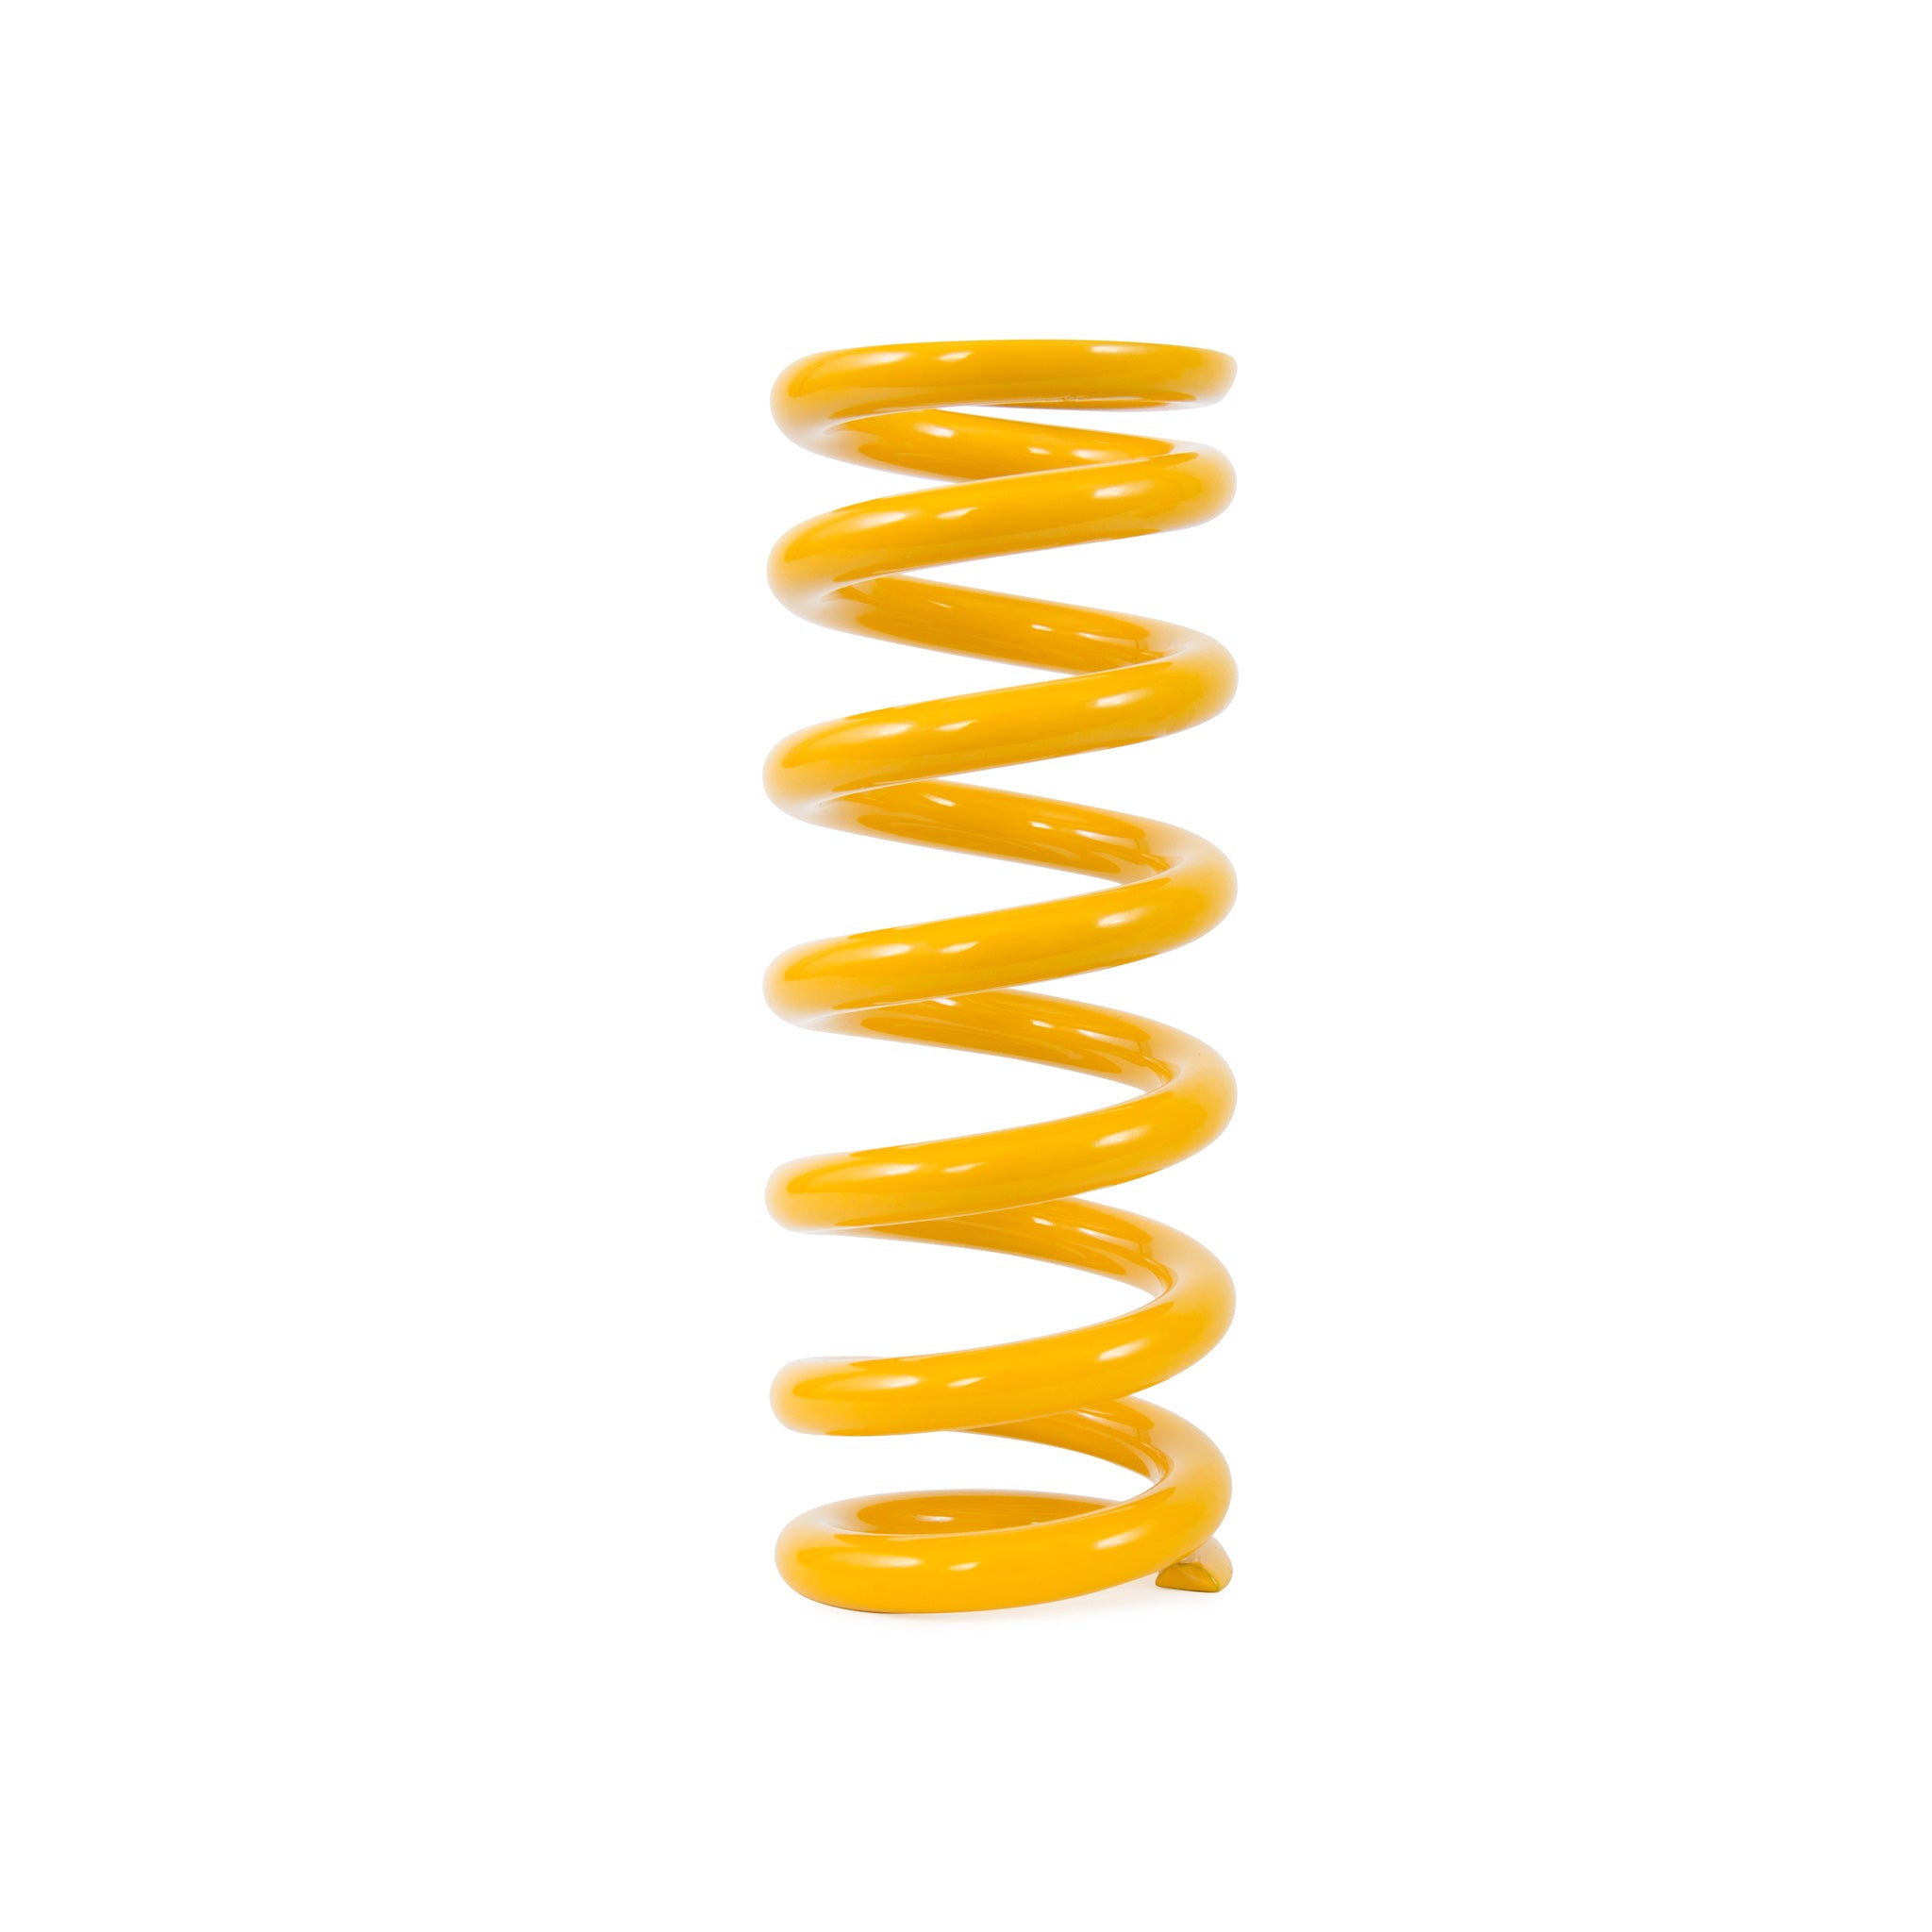 Ohlins Light Weight Spring 67mm S x 548 lbs/in